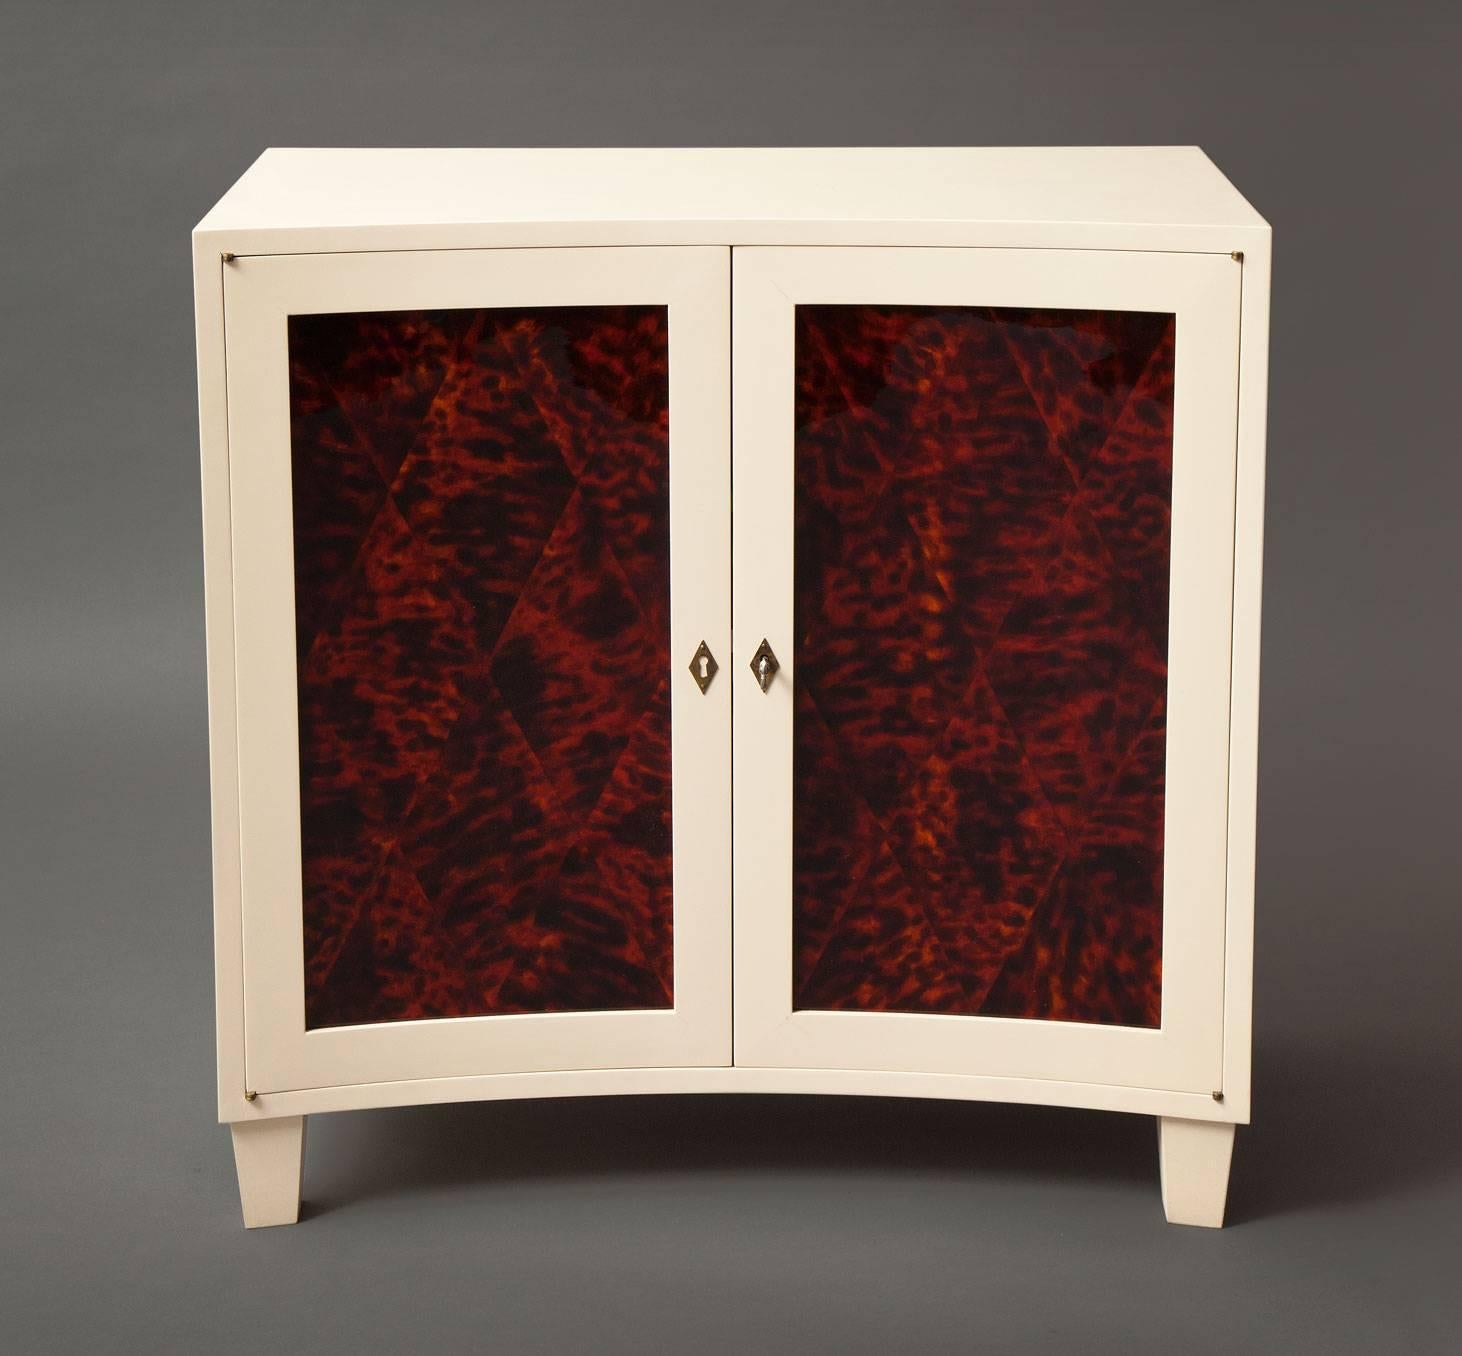 The two-door cabinet
Curved front two-door cabinet in a satin linen color
finish with inset decorative painted doors. 
Raised on tapering block feet.
Doors open to reveal three shelves. 
Custom sizes and faux finishes, including tortoiseshell
